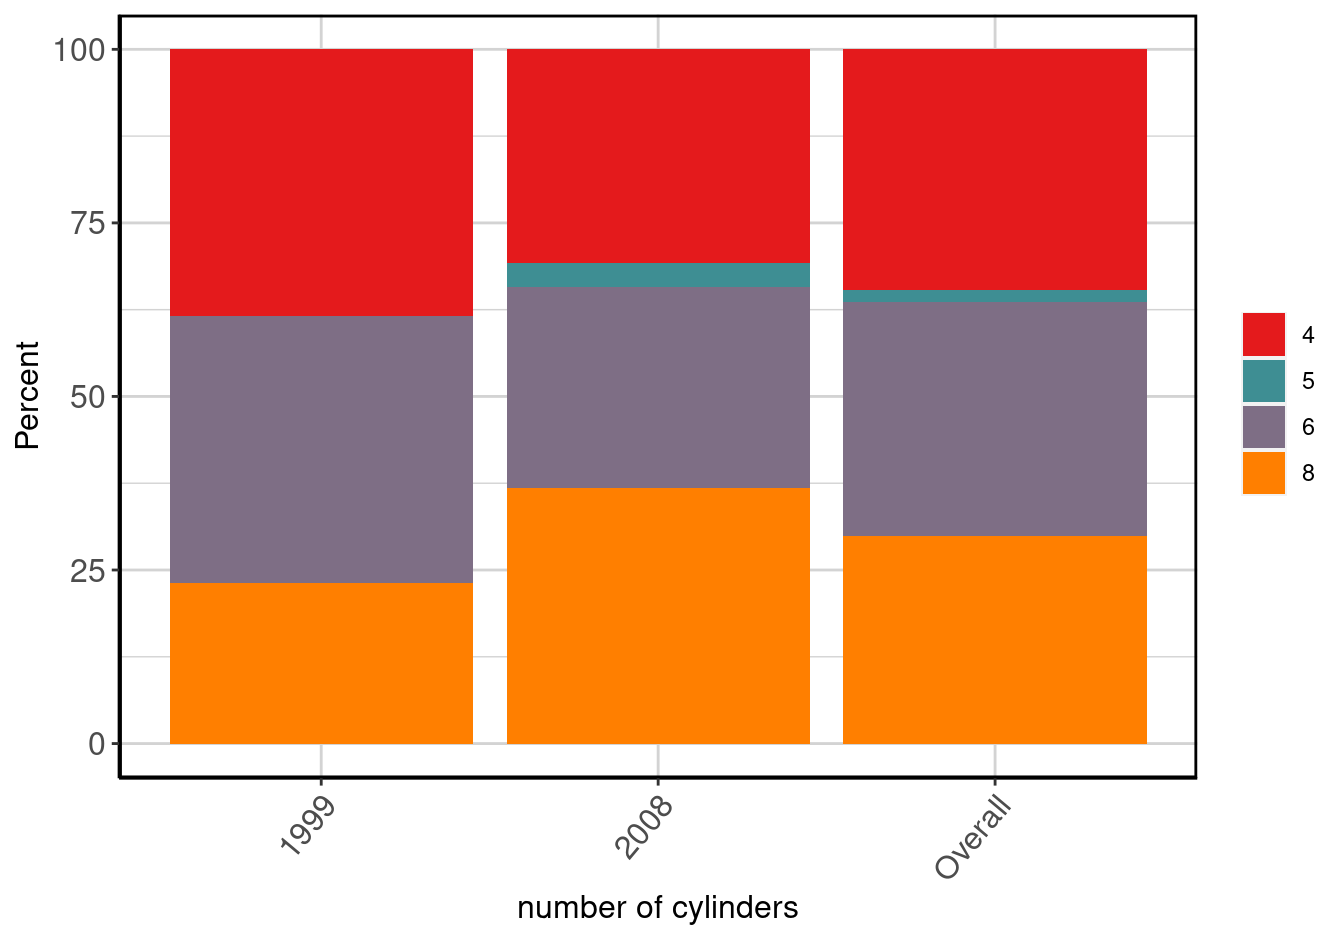 Stacked barplot of number of cylinders by year of manufacture.